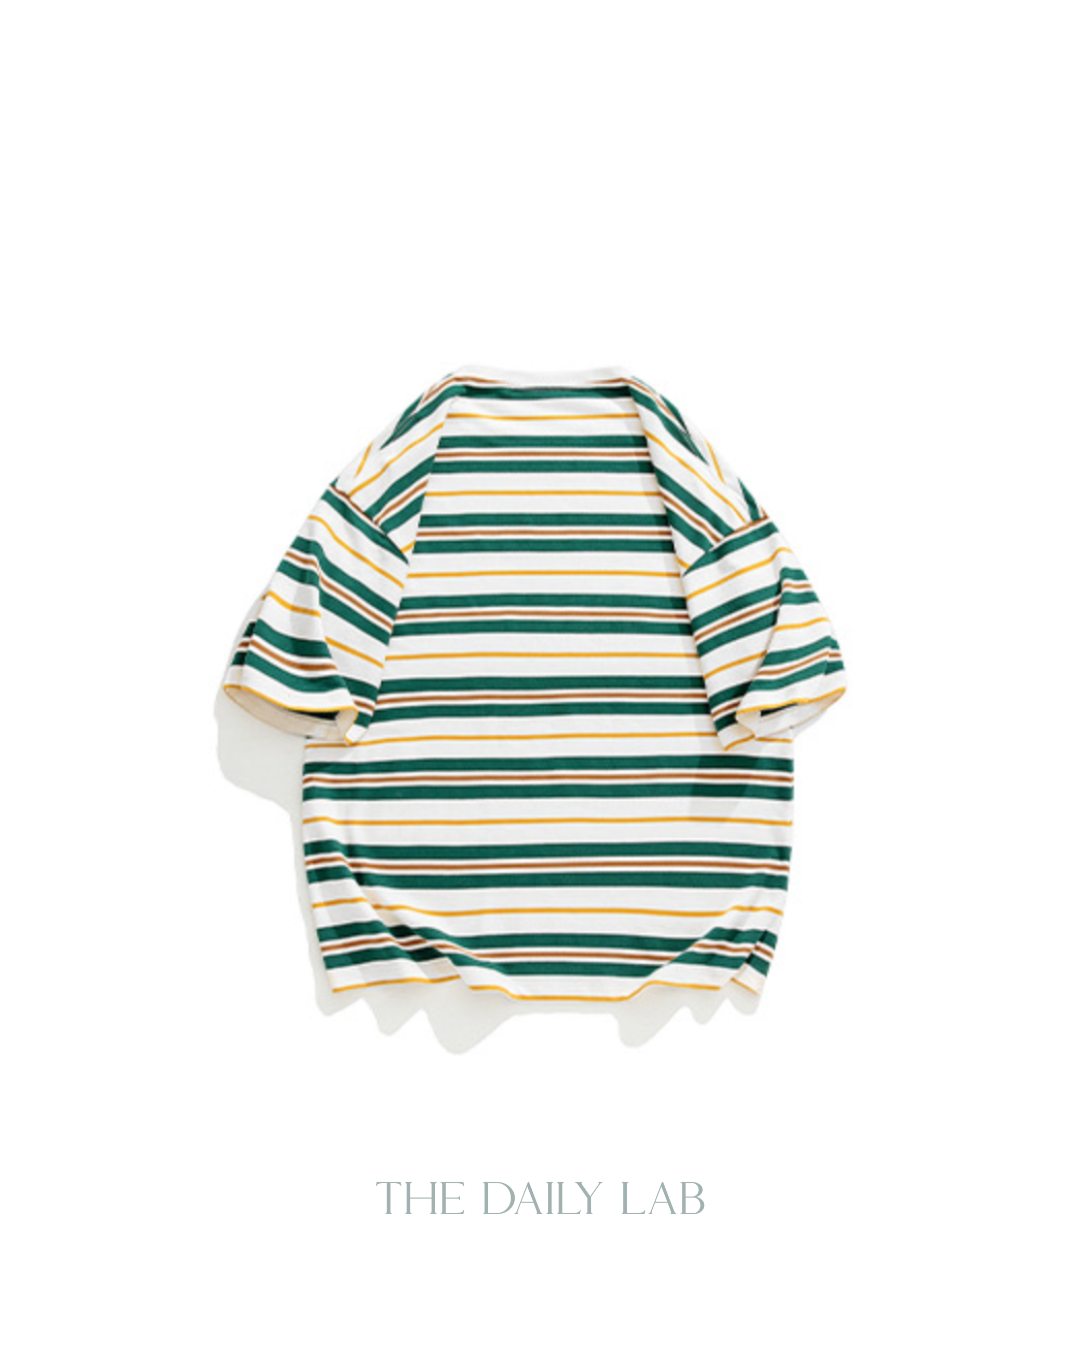 Retro Oversized Striped Line Tee in Green (Size M & L)